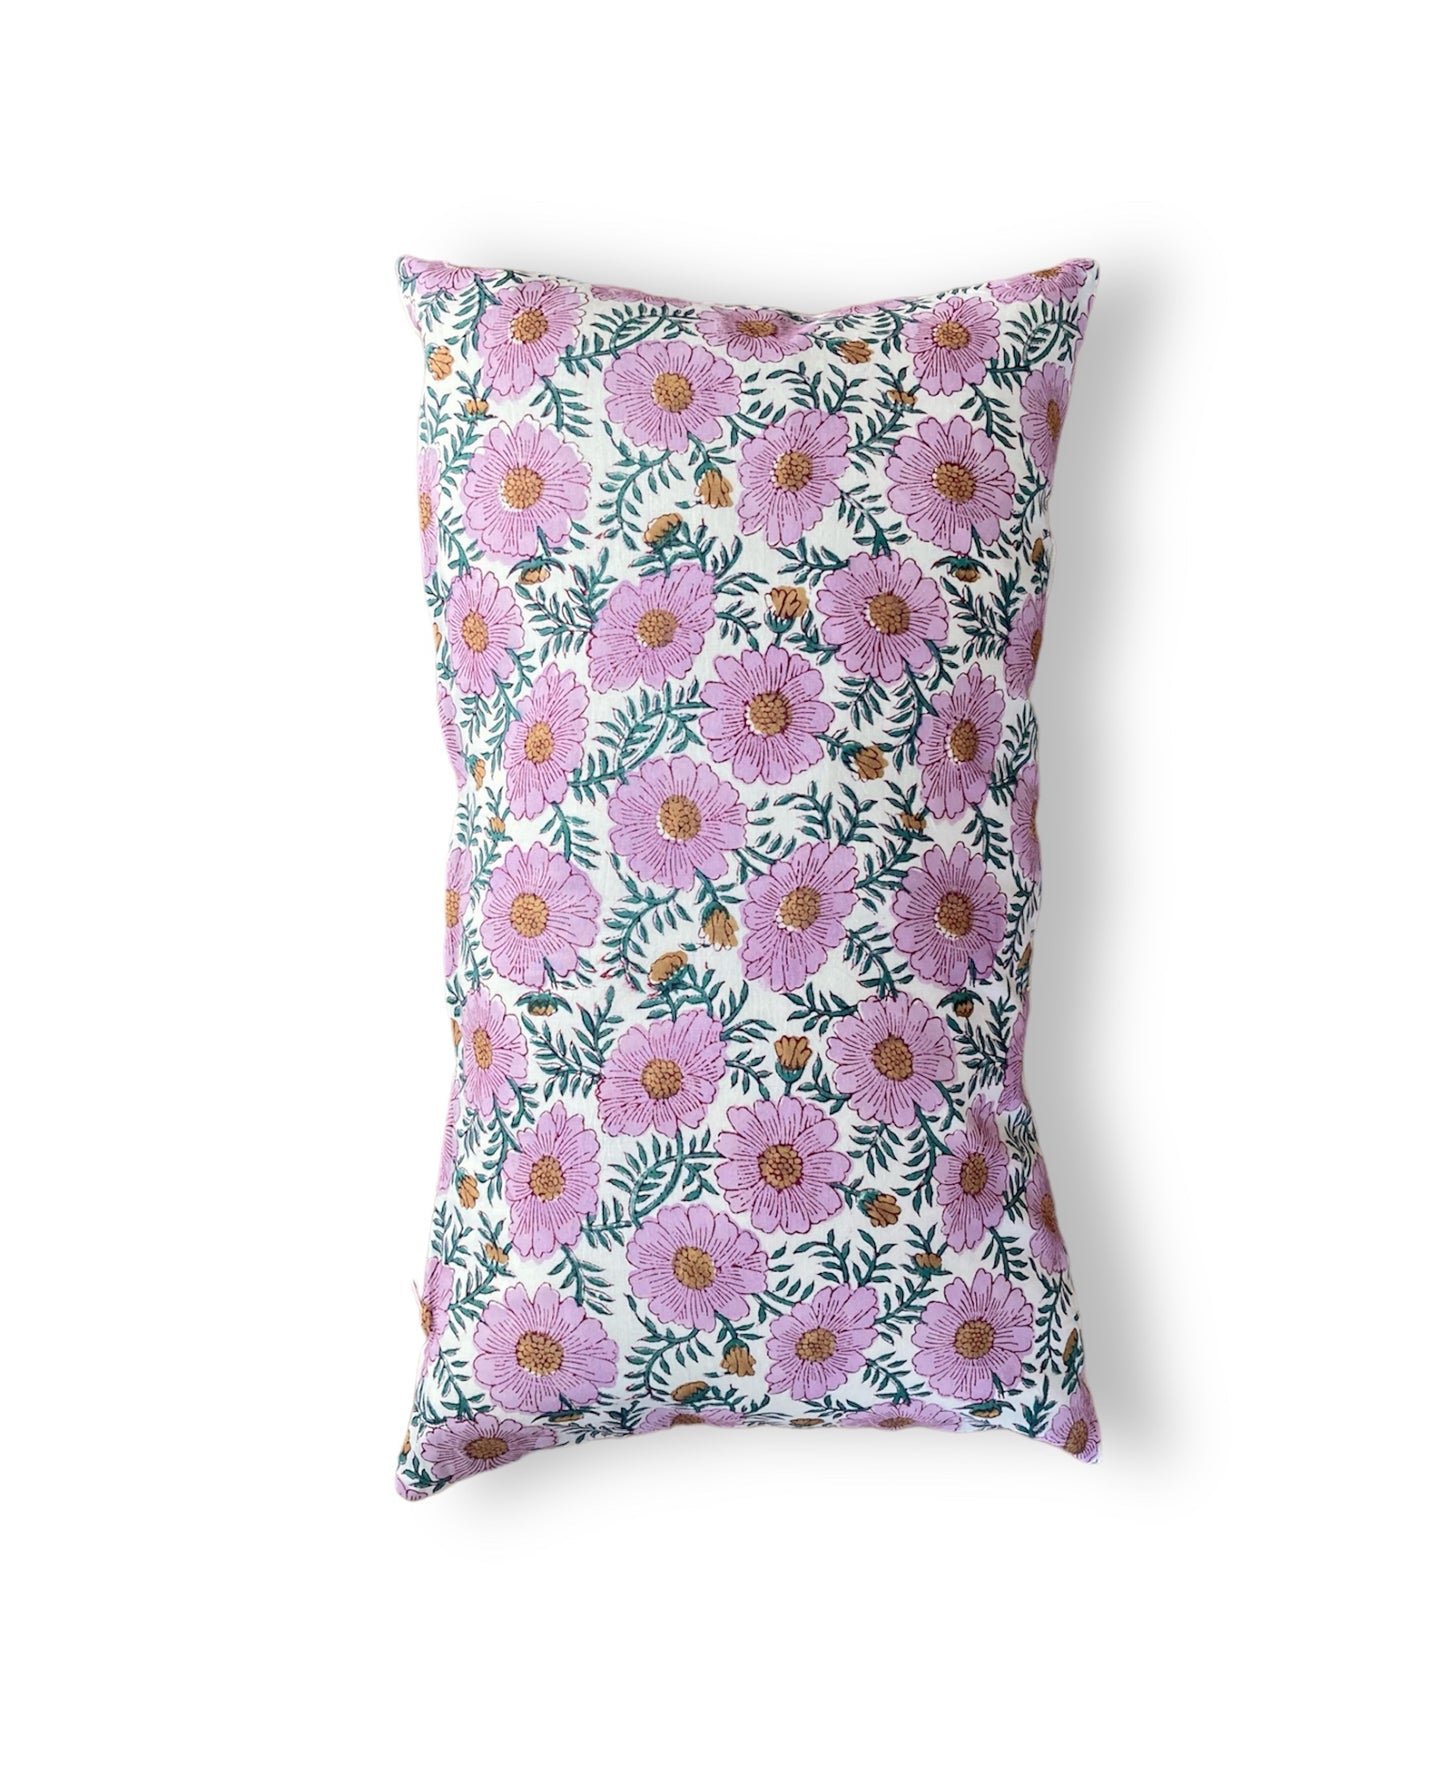 Hand Block Printed Cotton Fabric Cushion Cover　#cathedral-S/M